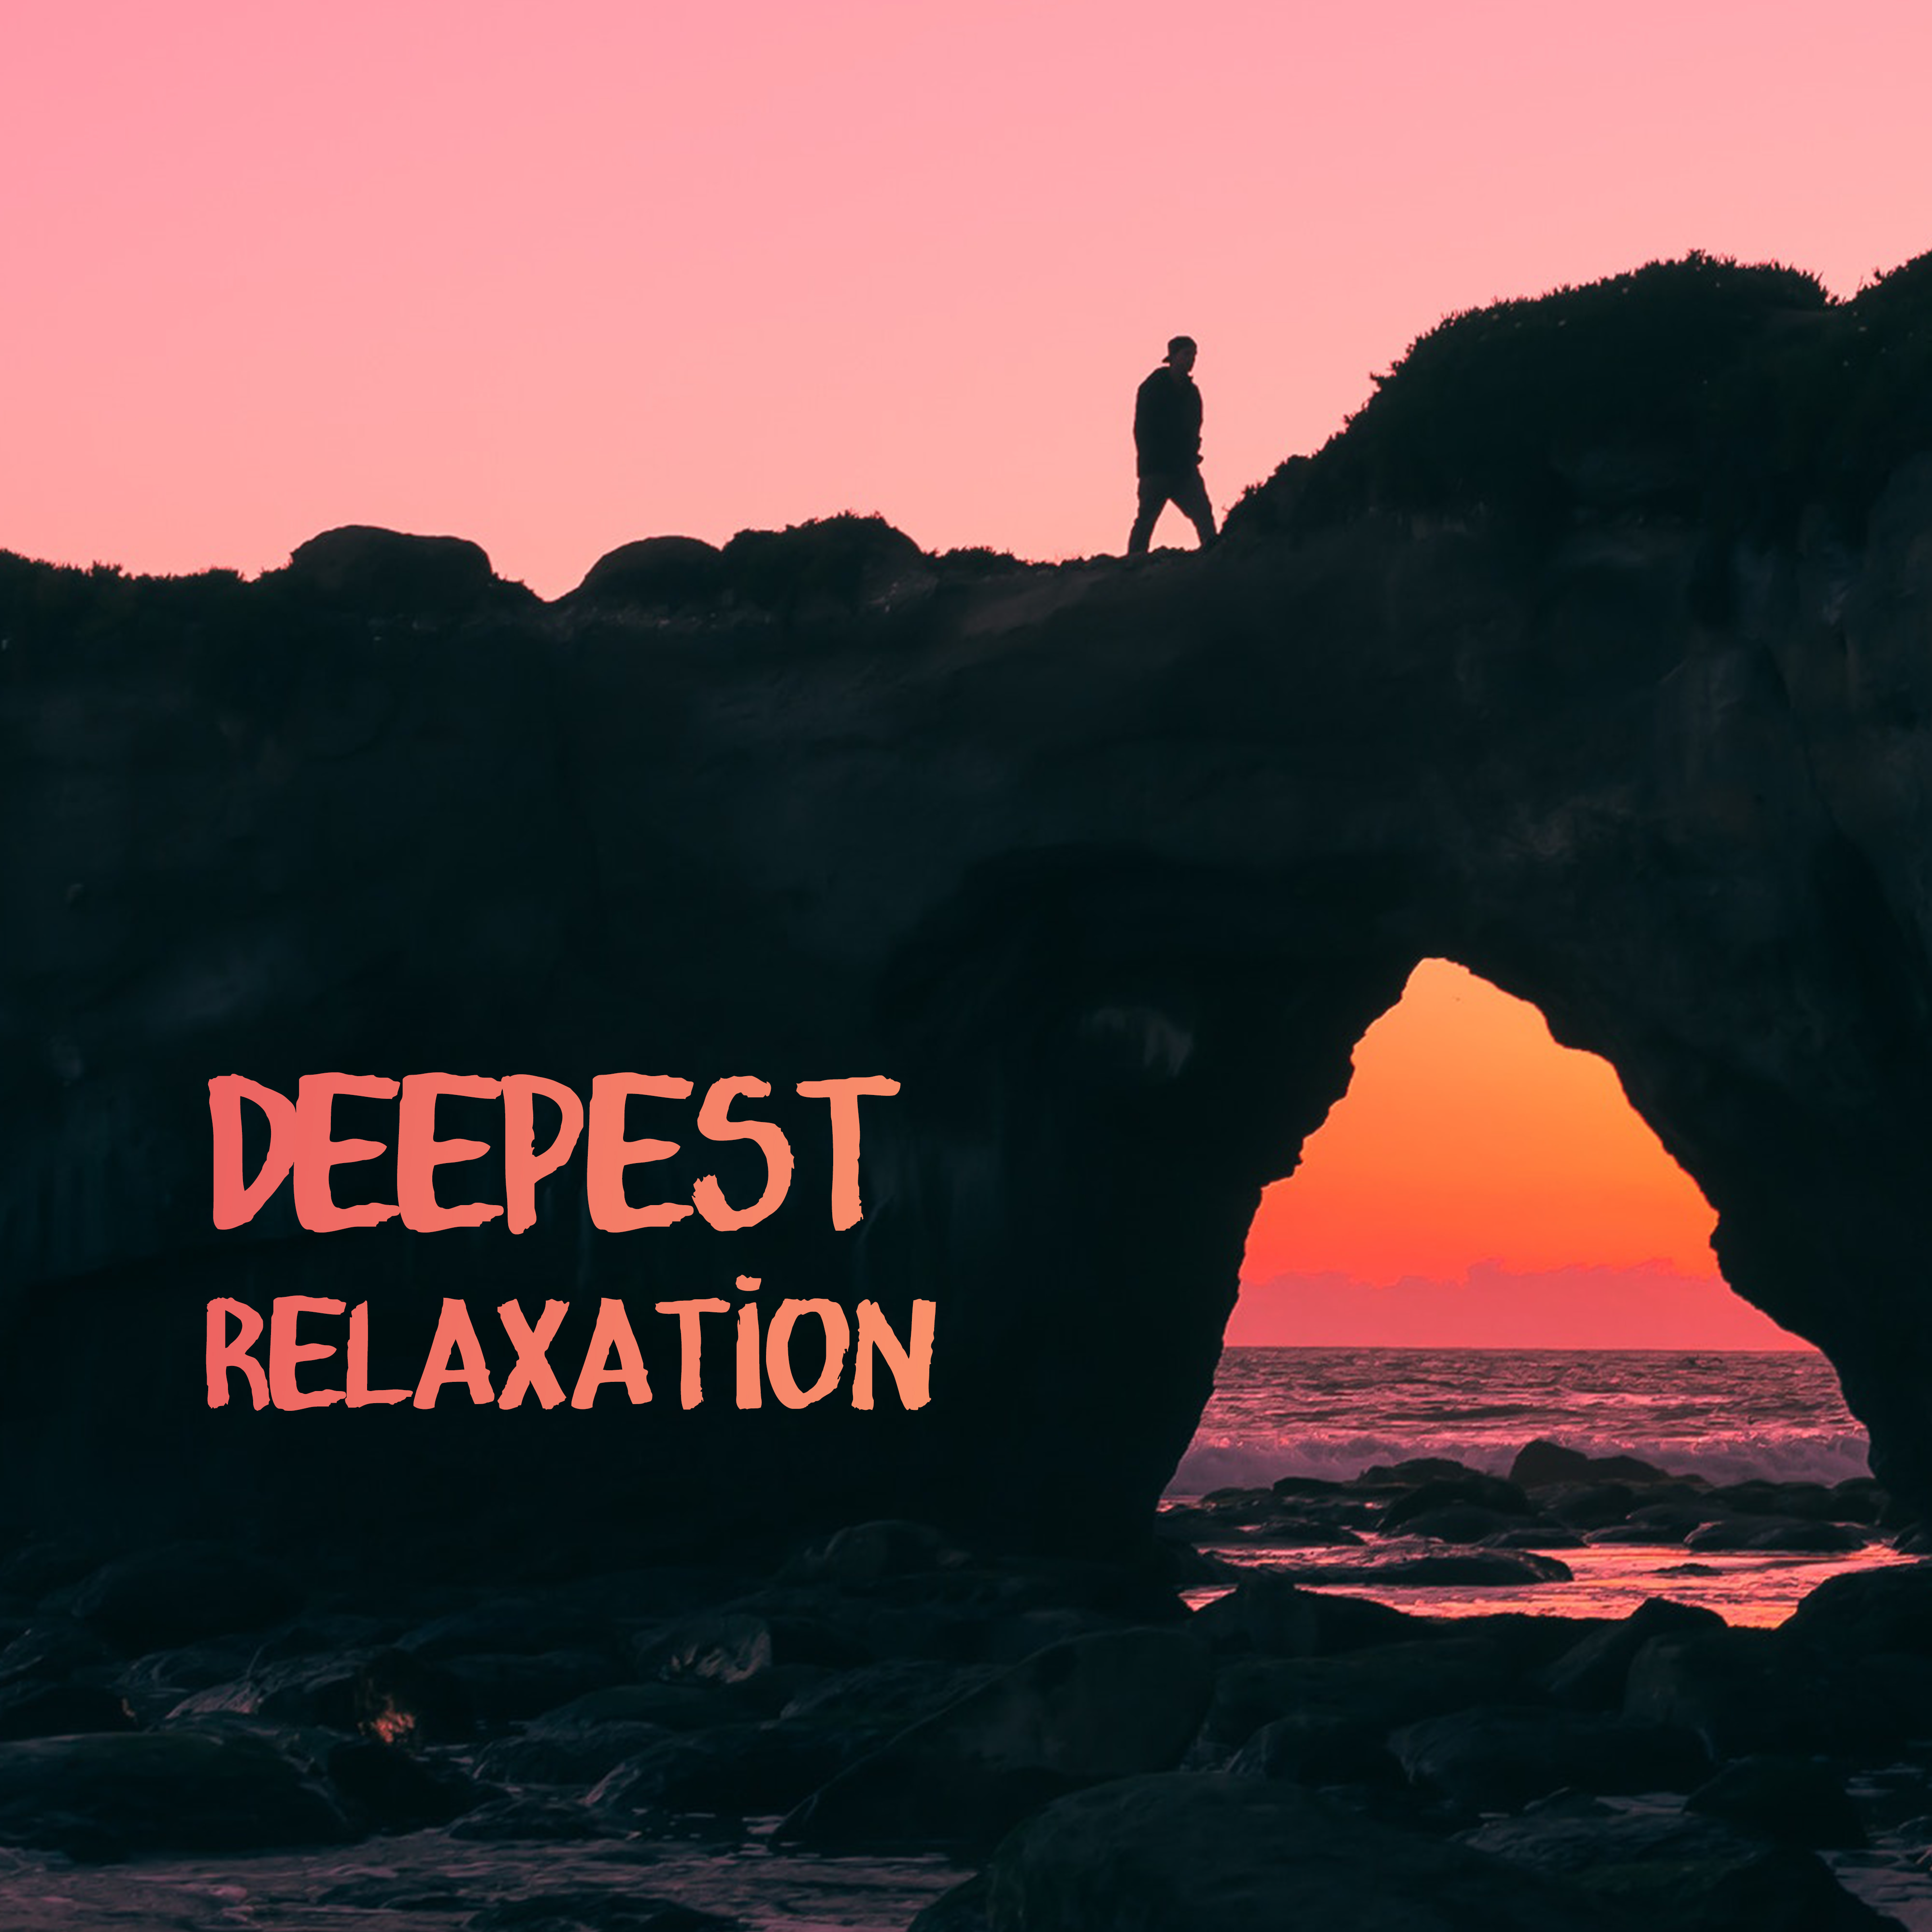 Deepest Relaxation – Peaceful and Completely Relaxing Music to Rest, Laze, De-Stress after a Hard Day and Gain New Strength